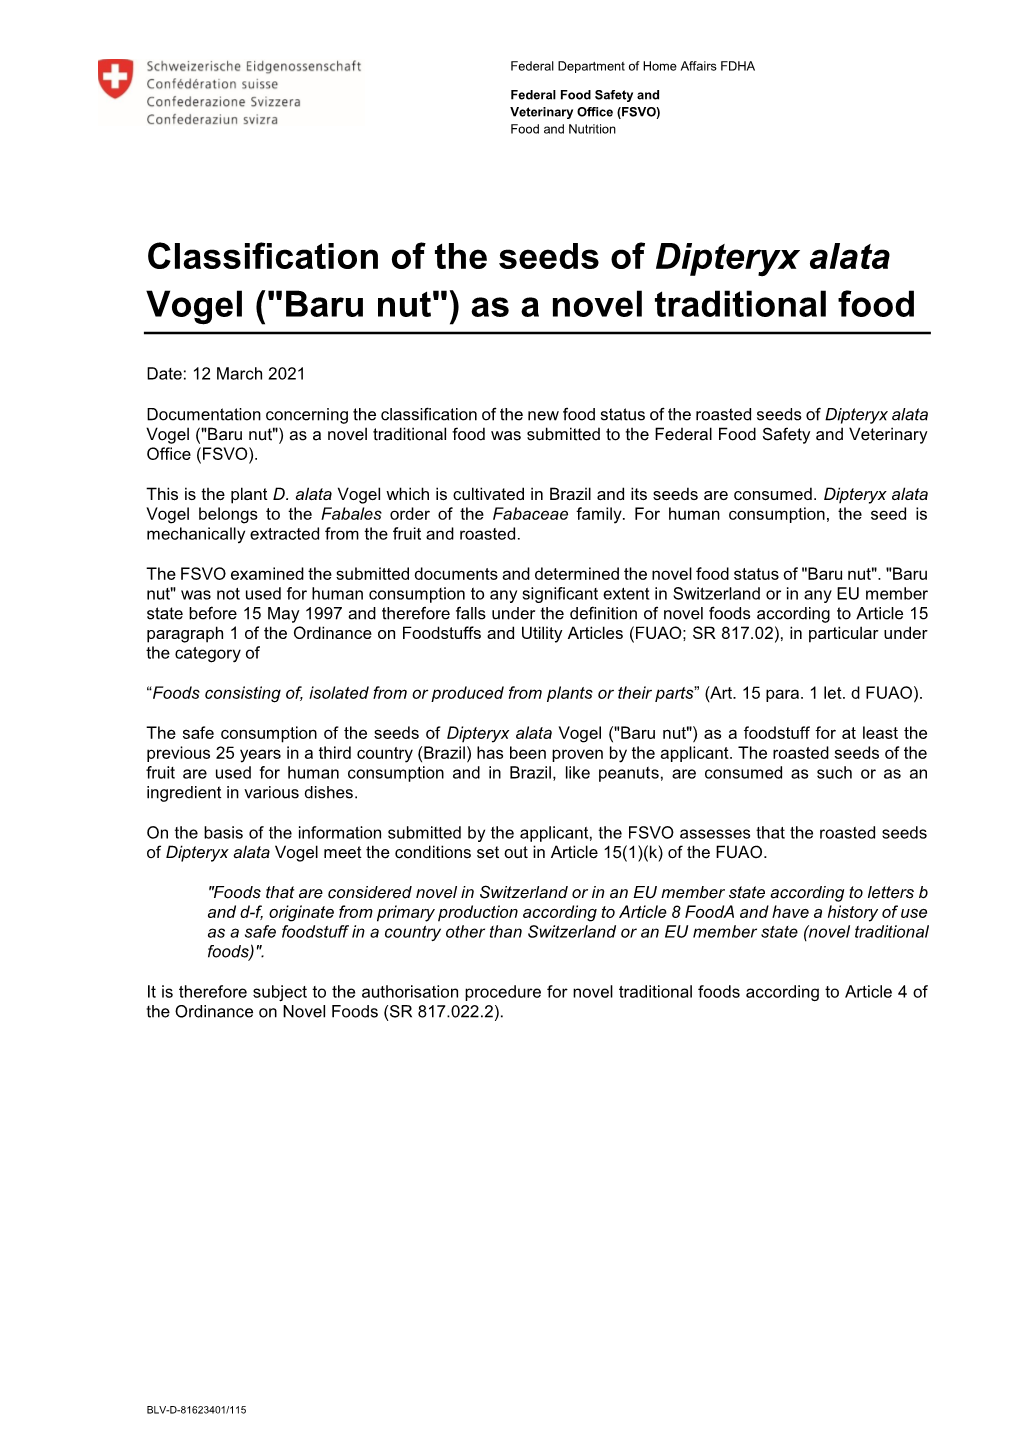 Classification of the Seeds of Dipteryx Alata Vogel ("Baru Nut") As a Novel Traditional Food